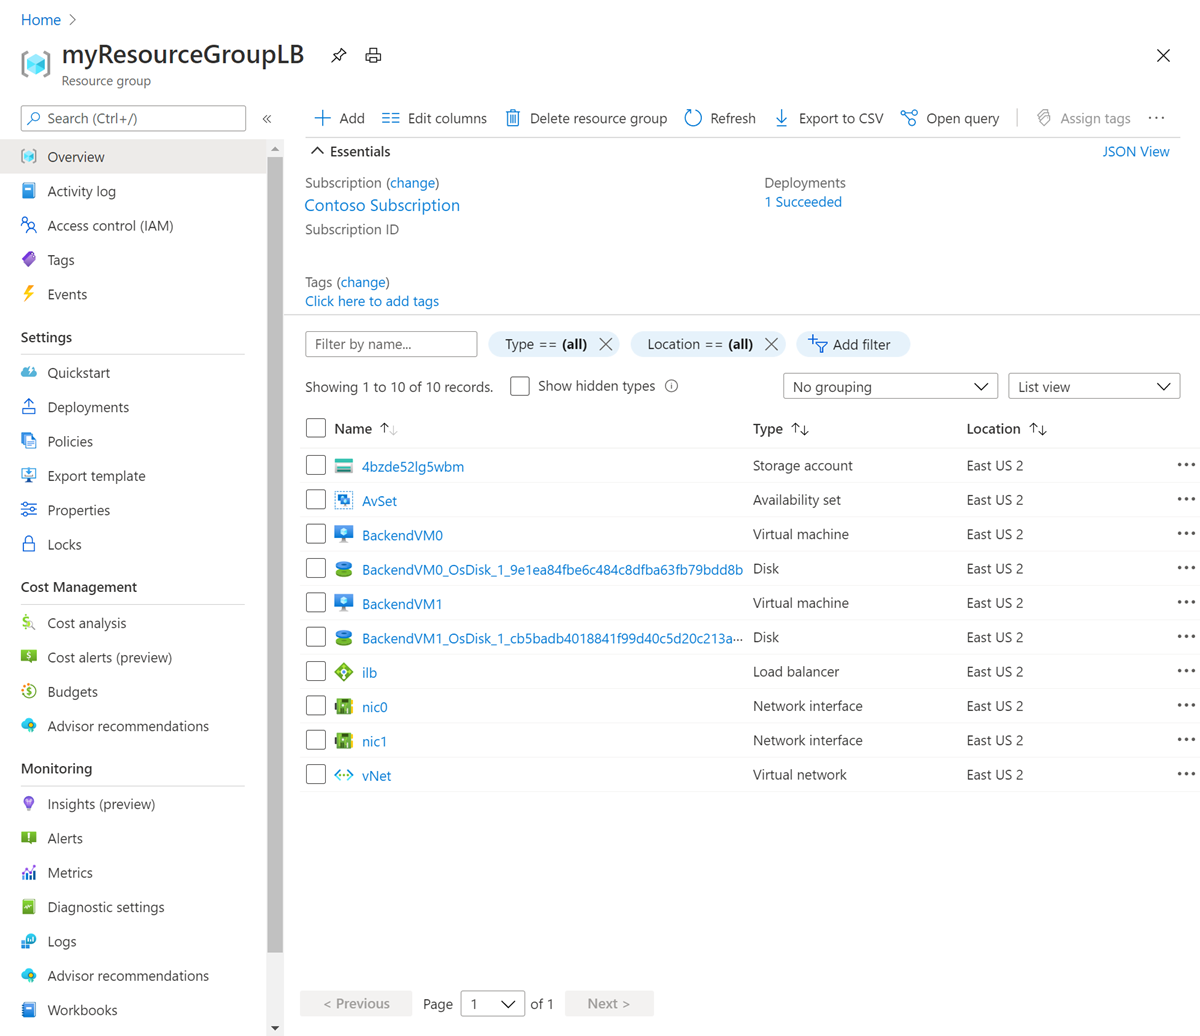 User Azure portal to verify creation of resources.